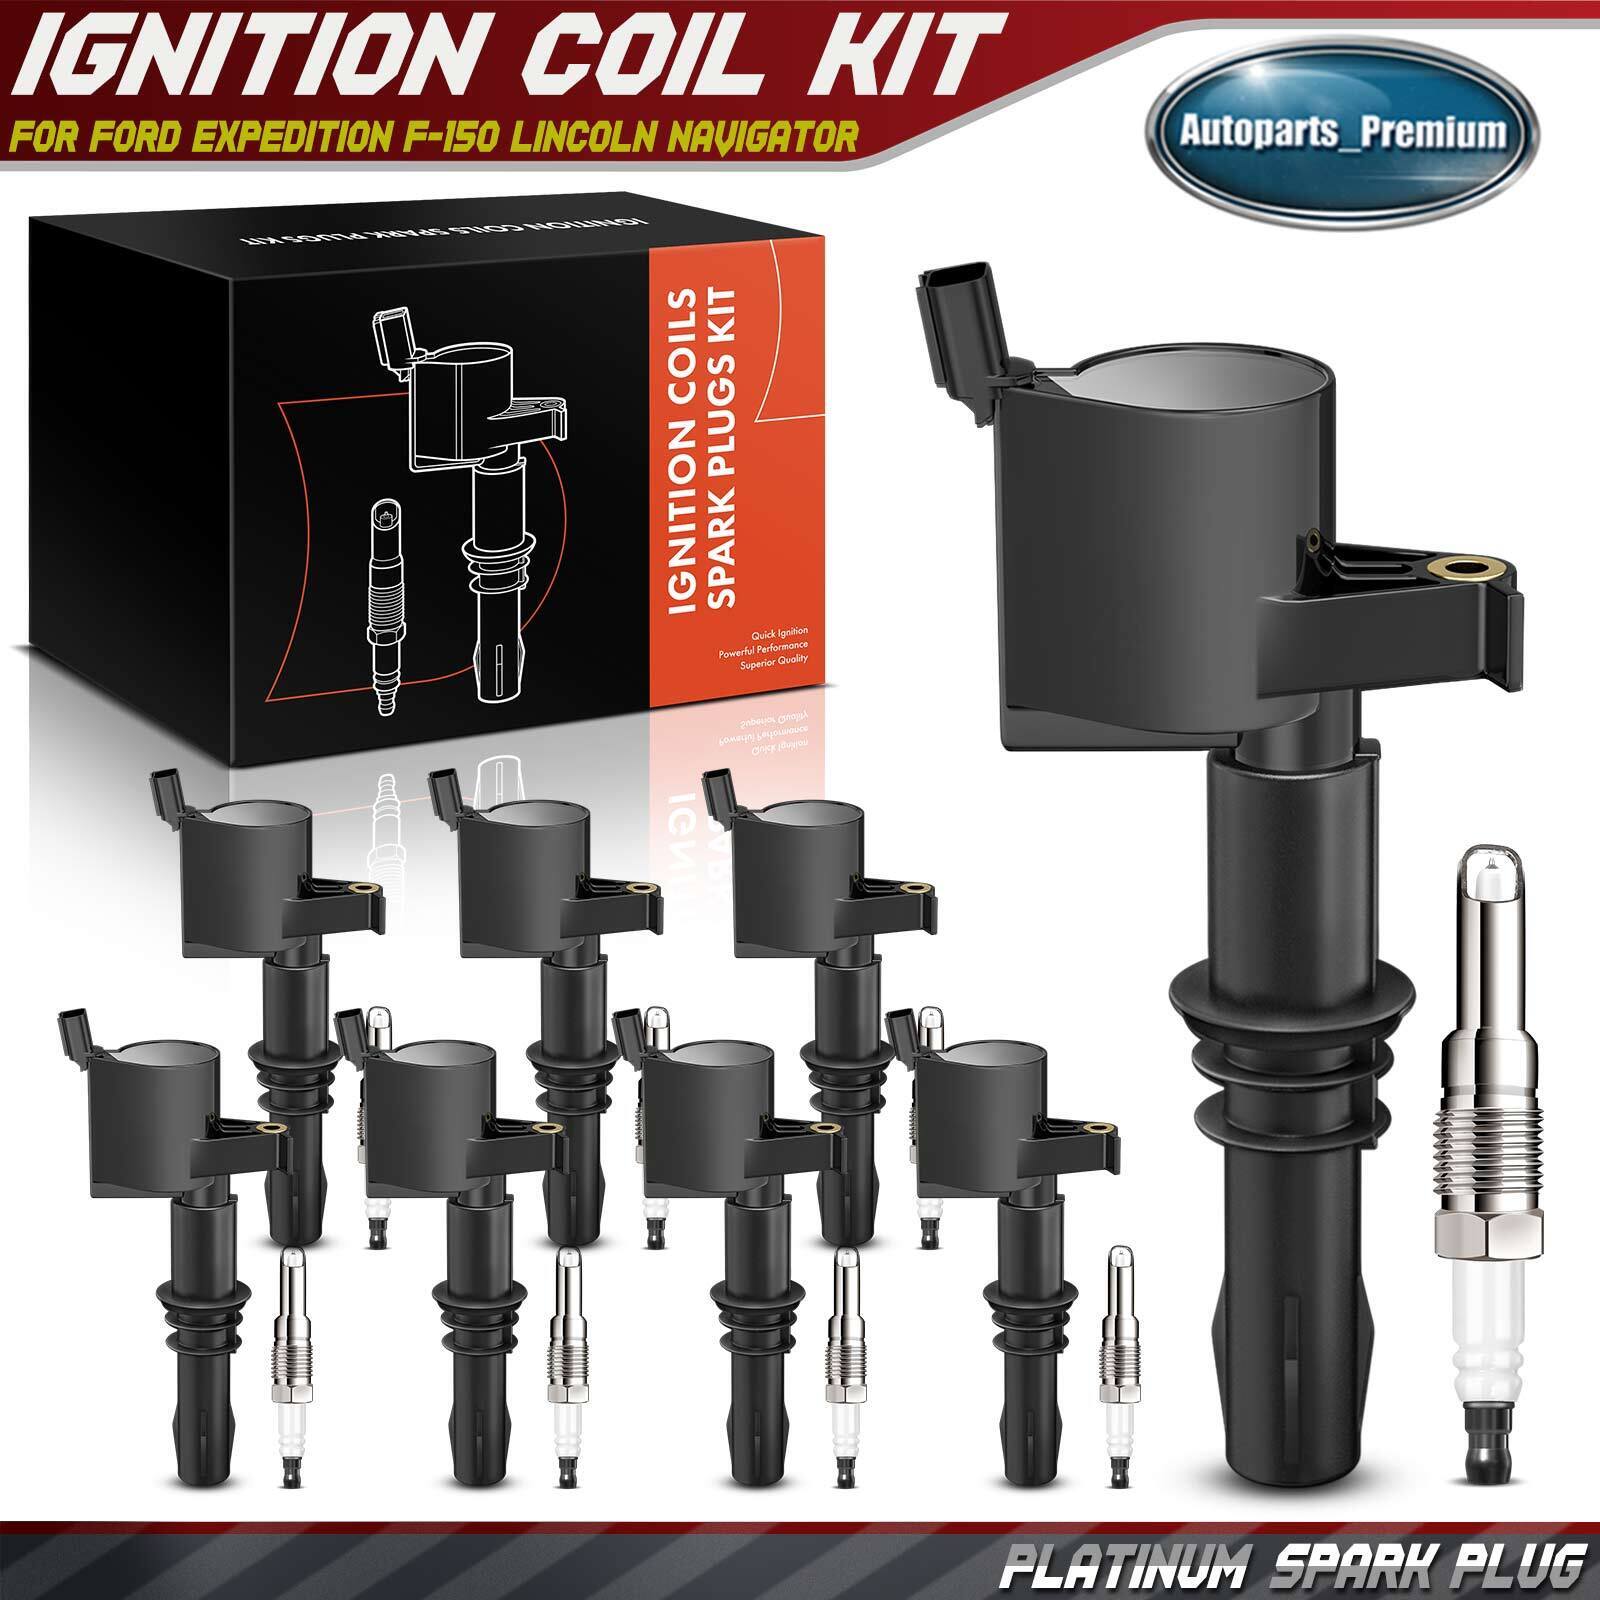 8x Ignition Coil & PLATINUM Spark Plug Kits for Ford F-150 Expedition 5.4L FD508